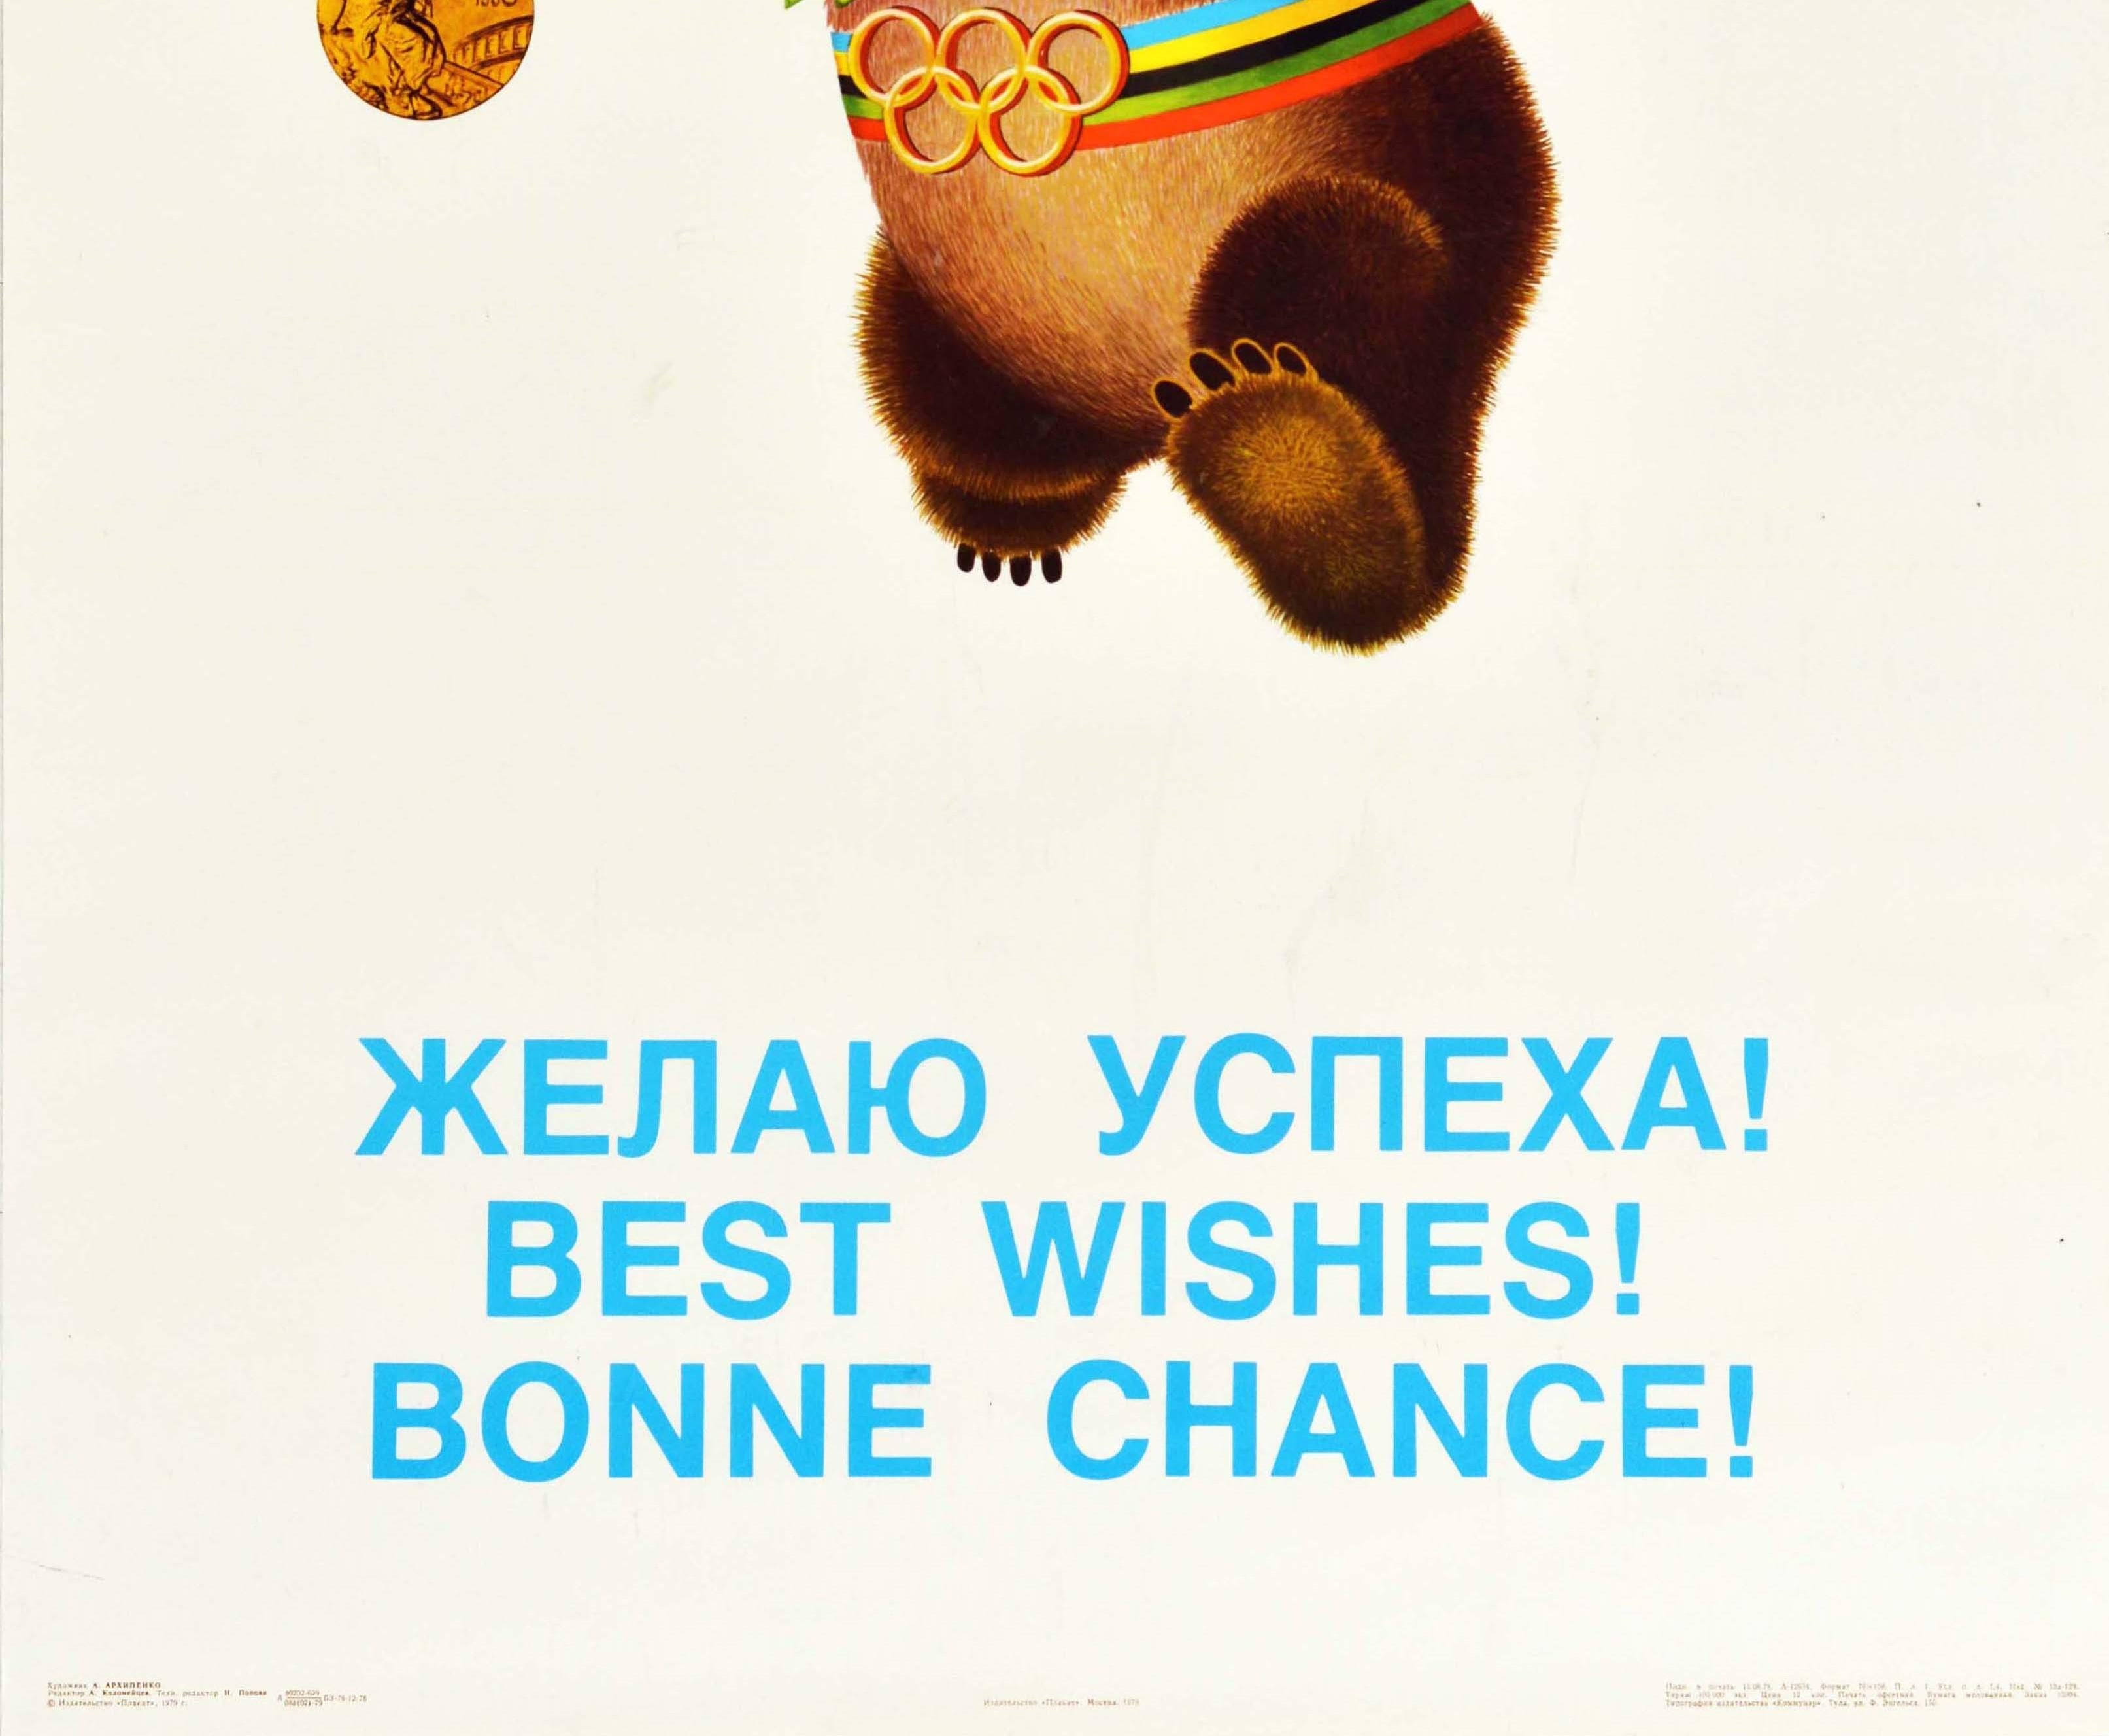 Russian Original Vintage Sport Poster Moscow Olympics Misha Bear Best Wishes! Good Luck